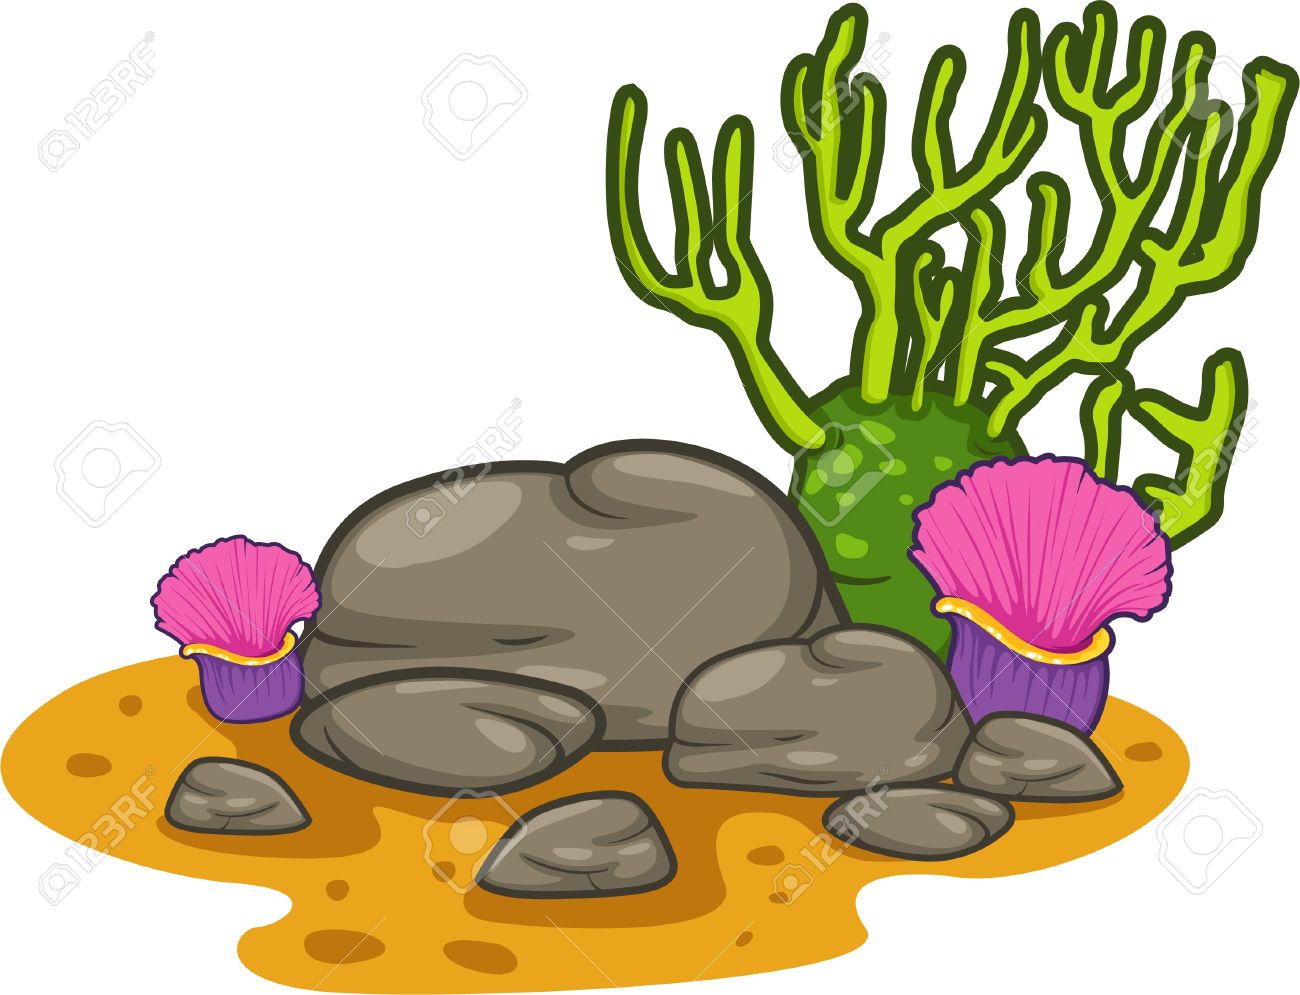 Anemone clipart #6, Download drawings